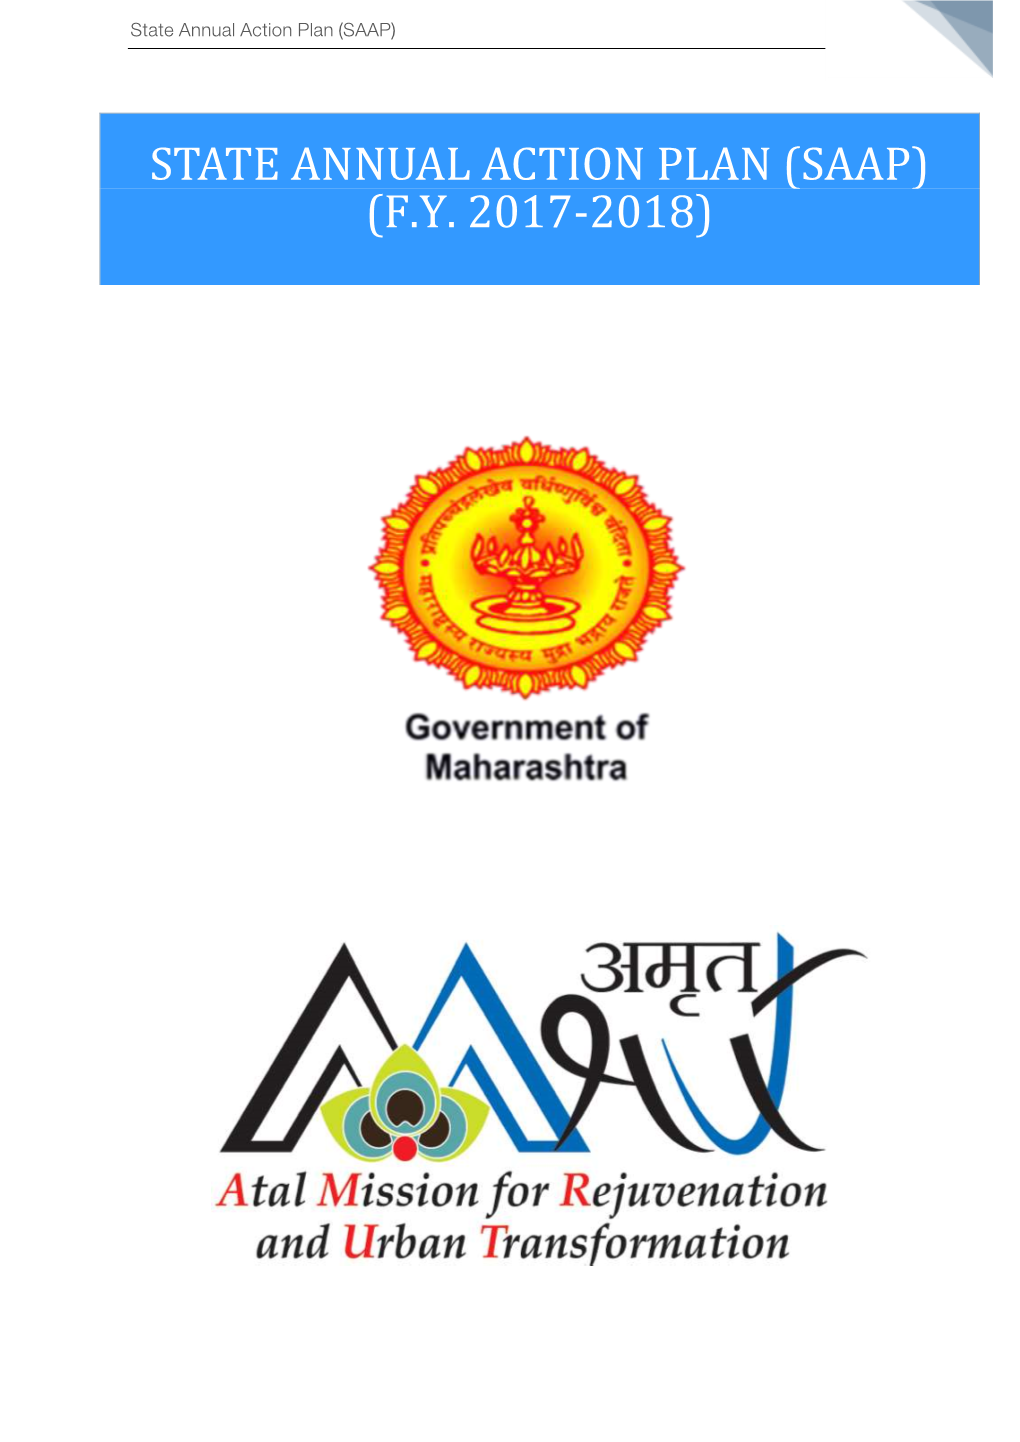 STATE ANNUAL ACTION PLAN (SAAP) for Maharashtra